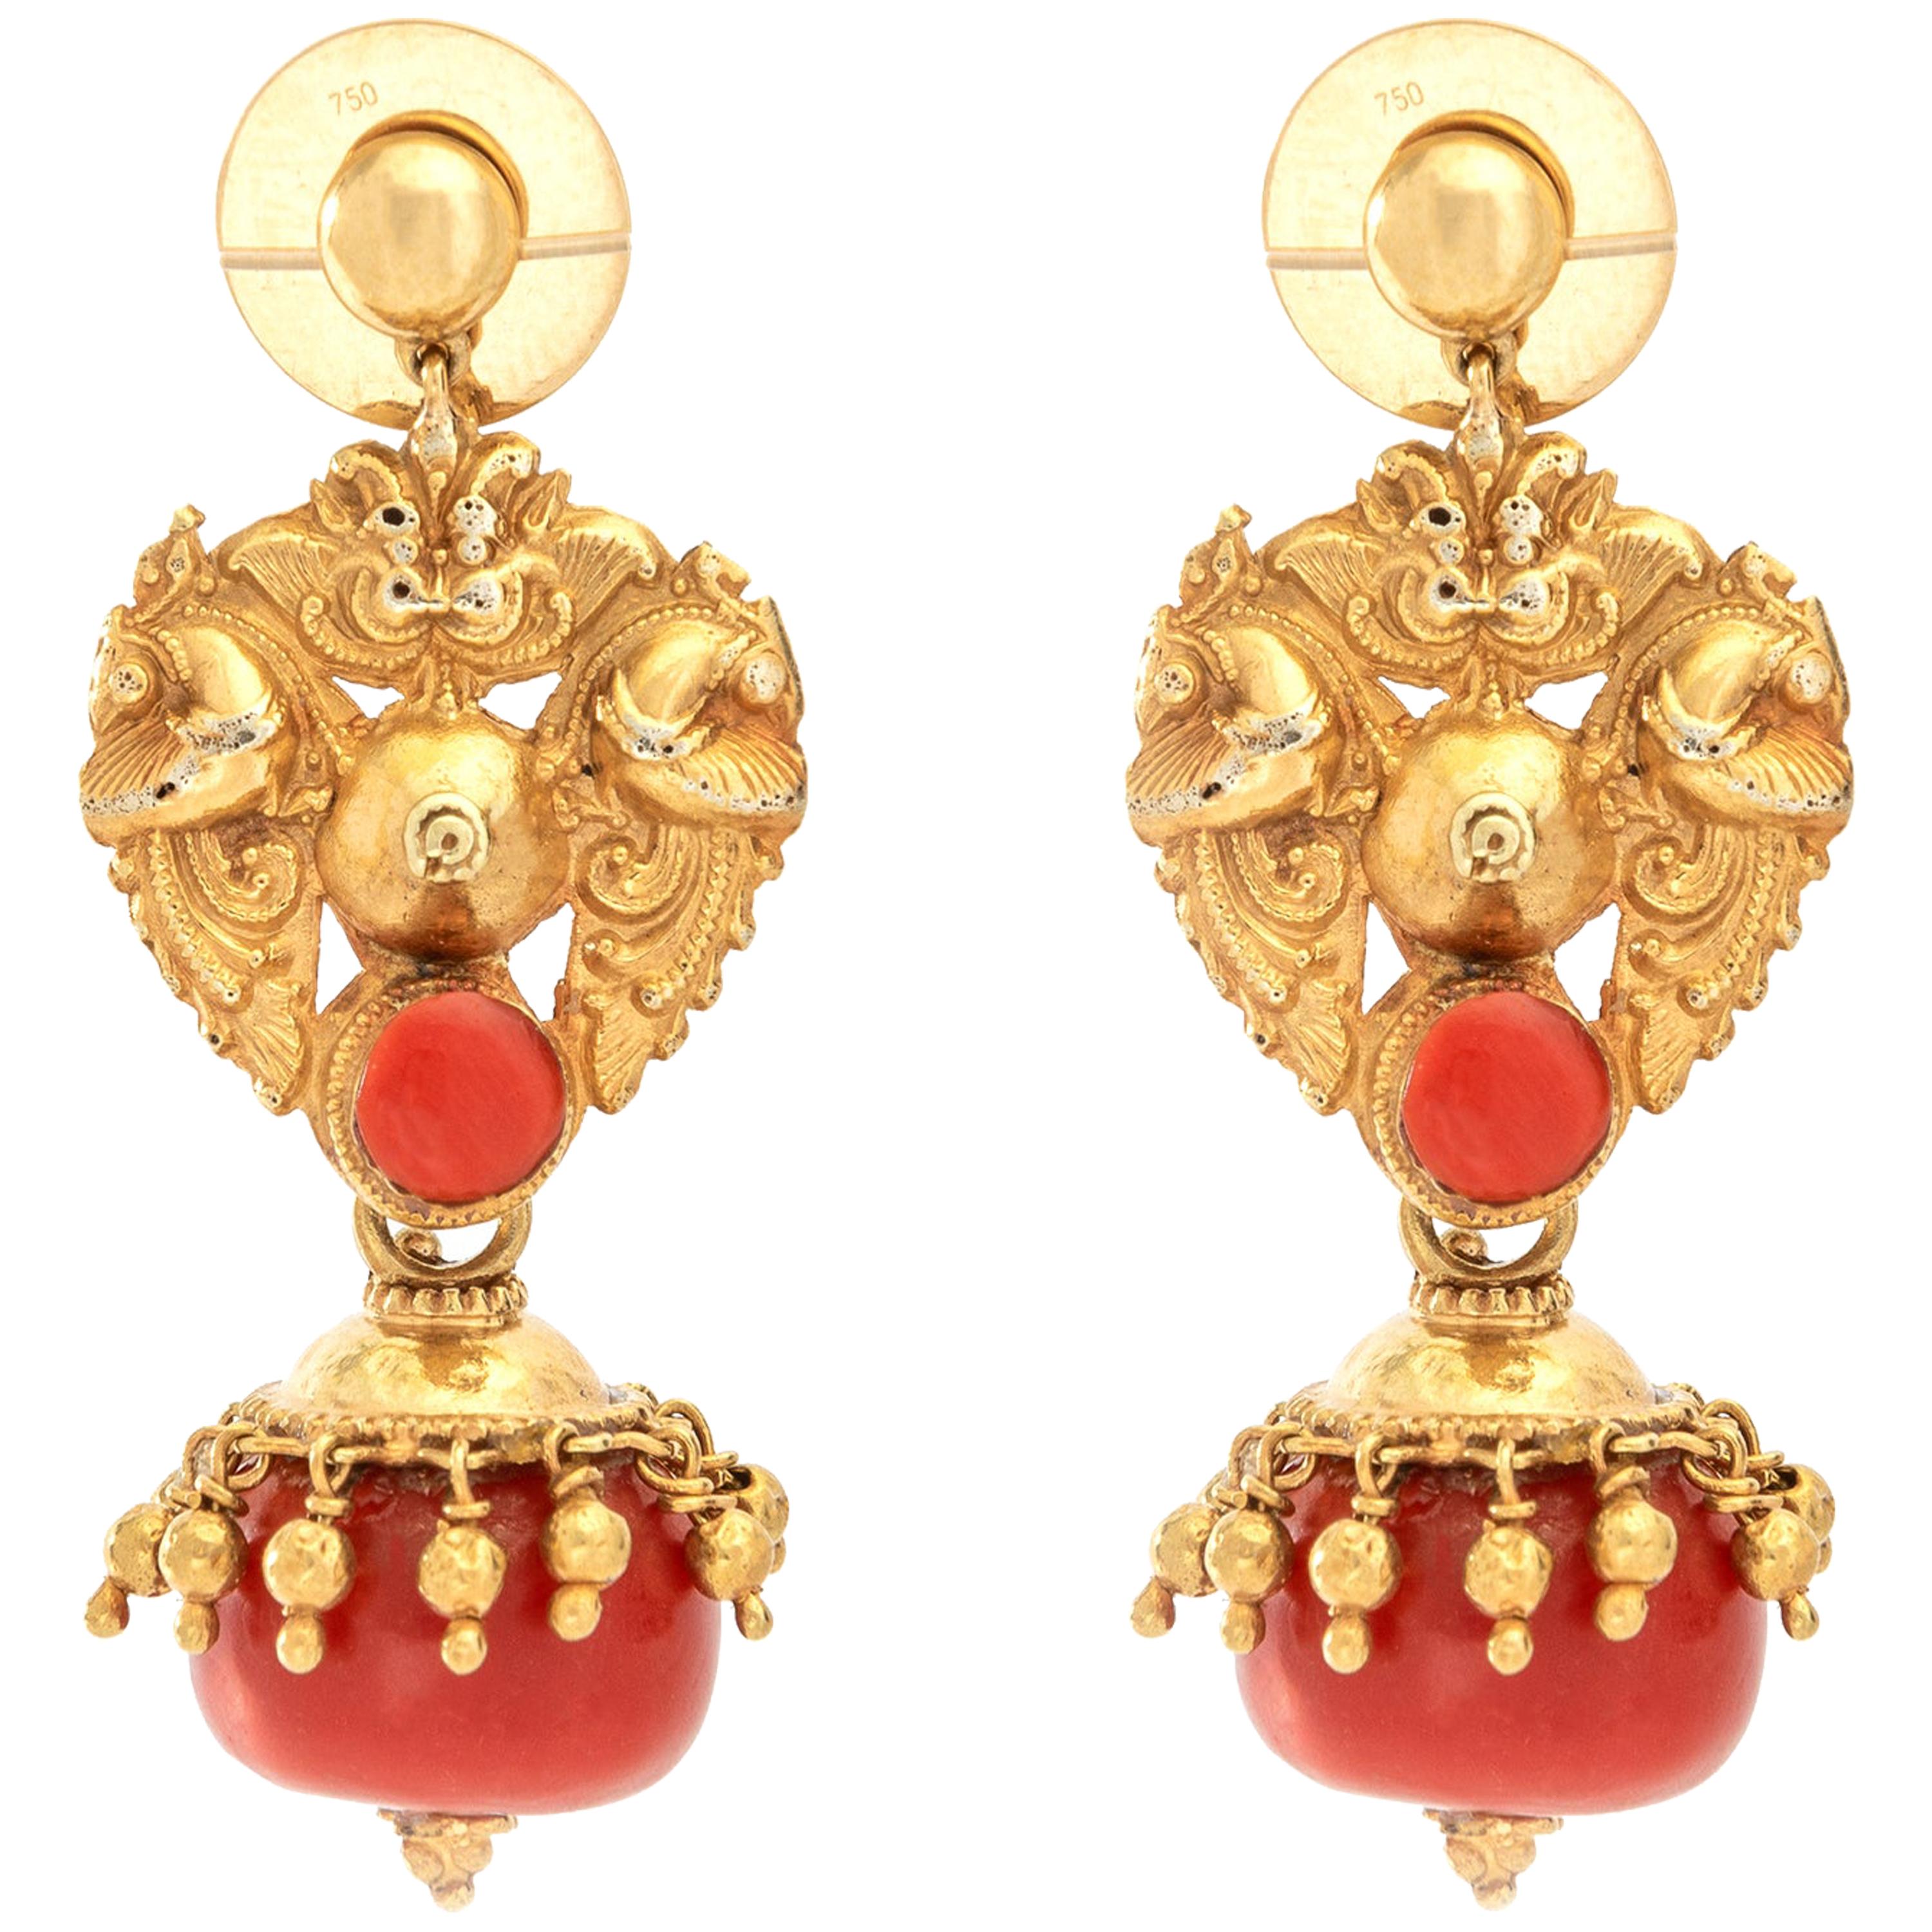 Antique Gold Earrings Design - South India Jewels